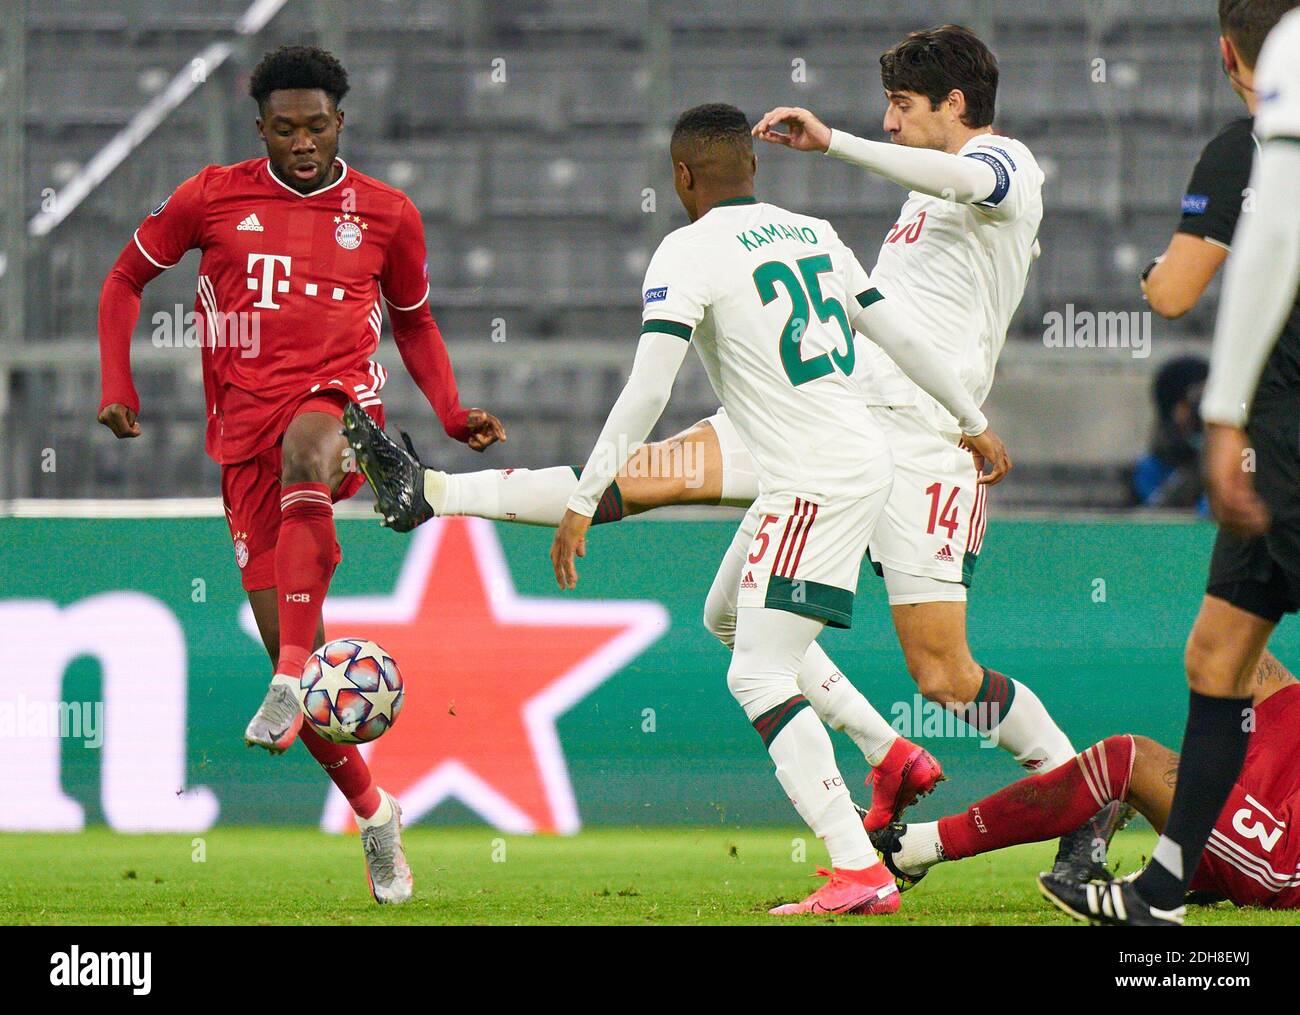 Alphonso DAVIES, FCB 19  compete for the ball, tackling, duel, header, zweikampf, action, fight against Vedran CORLUKA, Lok Moskau Nr. 14 Francois KAMANO, Lok Moskau Nr. 25  in the match  FC BAYERN MUENCHEN - LOKOMOTIVE MOSKAU 2-0 of football UEFA Champions League group stage in season 2020/2021 in Munich, December 9, 2020.   © Peter Schatz / Alamy Live News Stock Photo